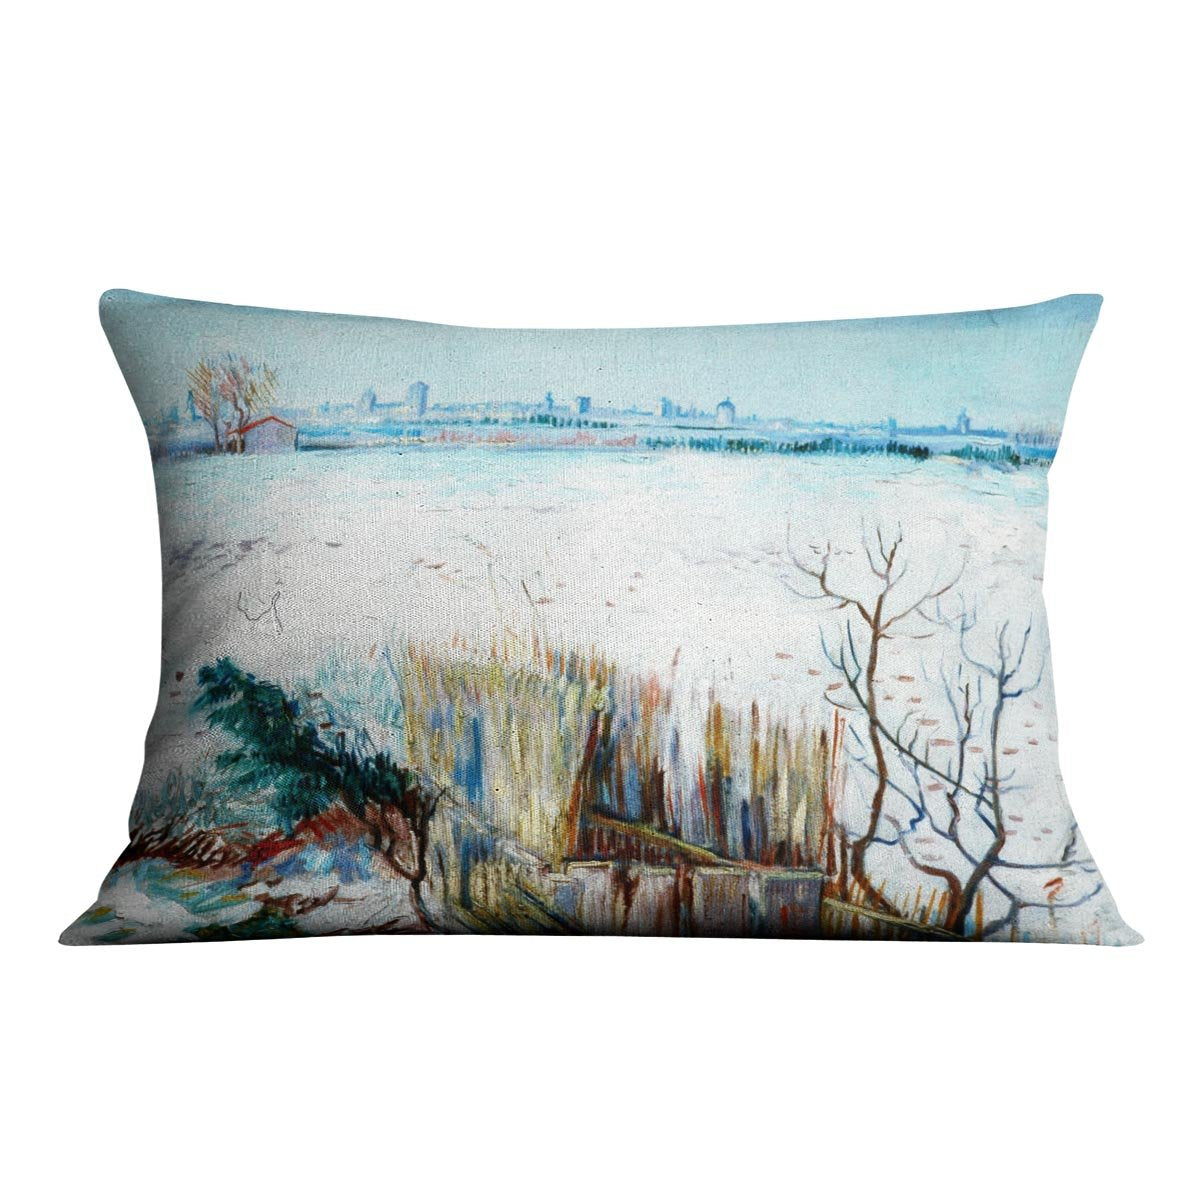 Snowy Landscape with Arles in the Background by Van Gogh Throw Pillow